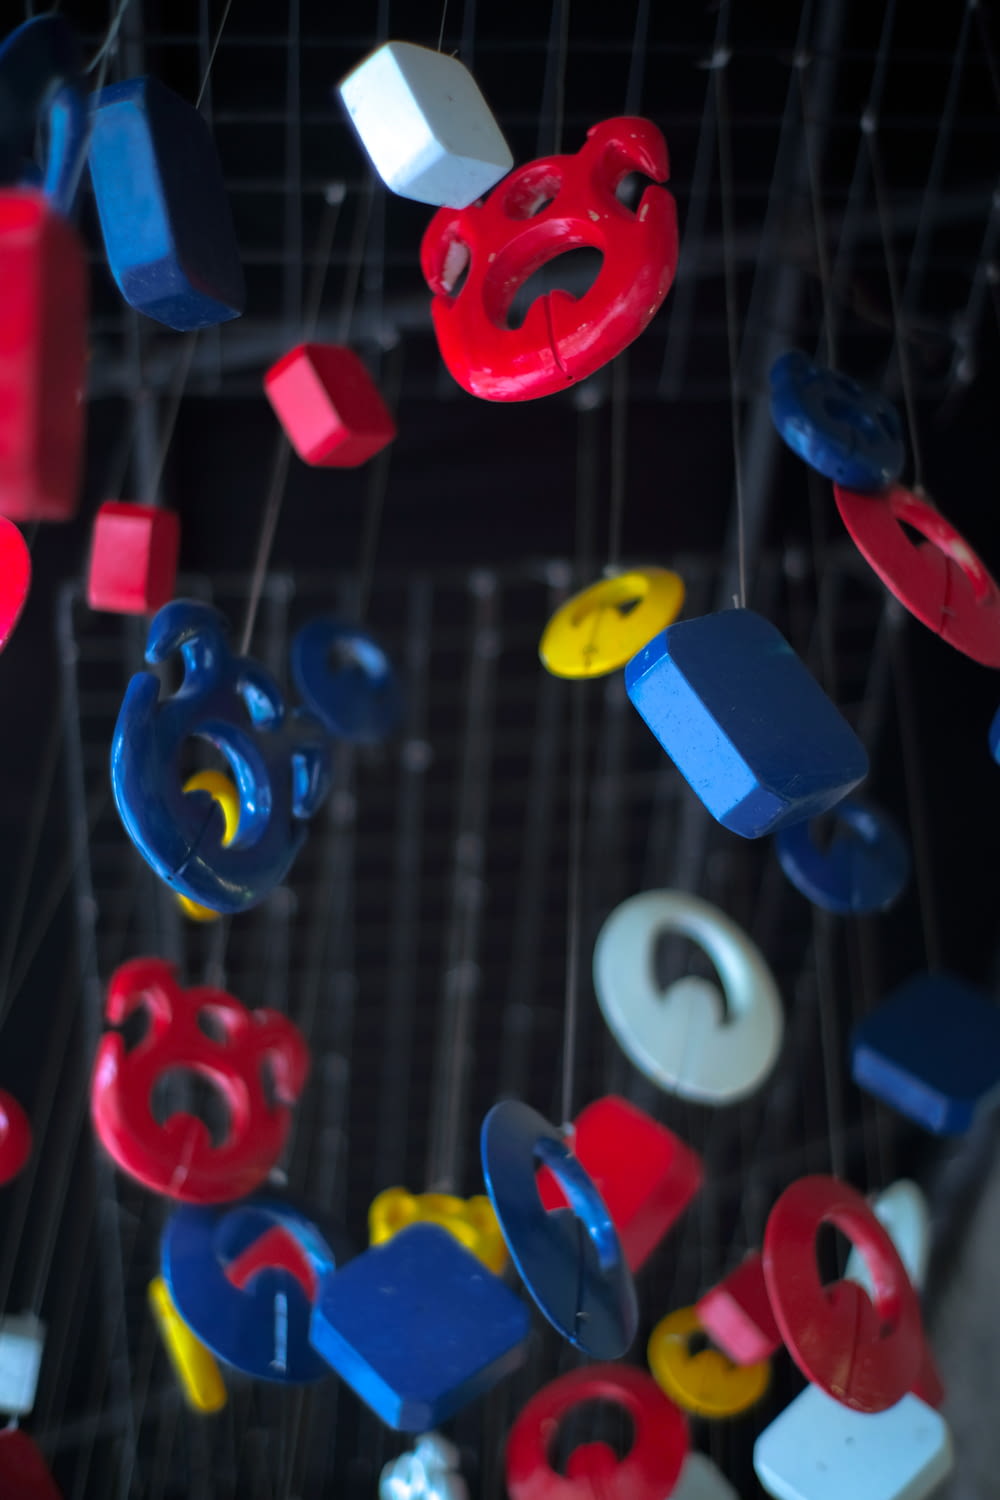 blue, red, and yellow plastic hanging toys